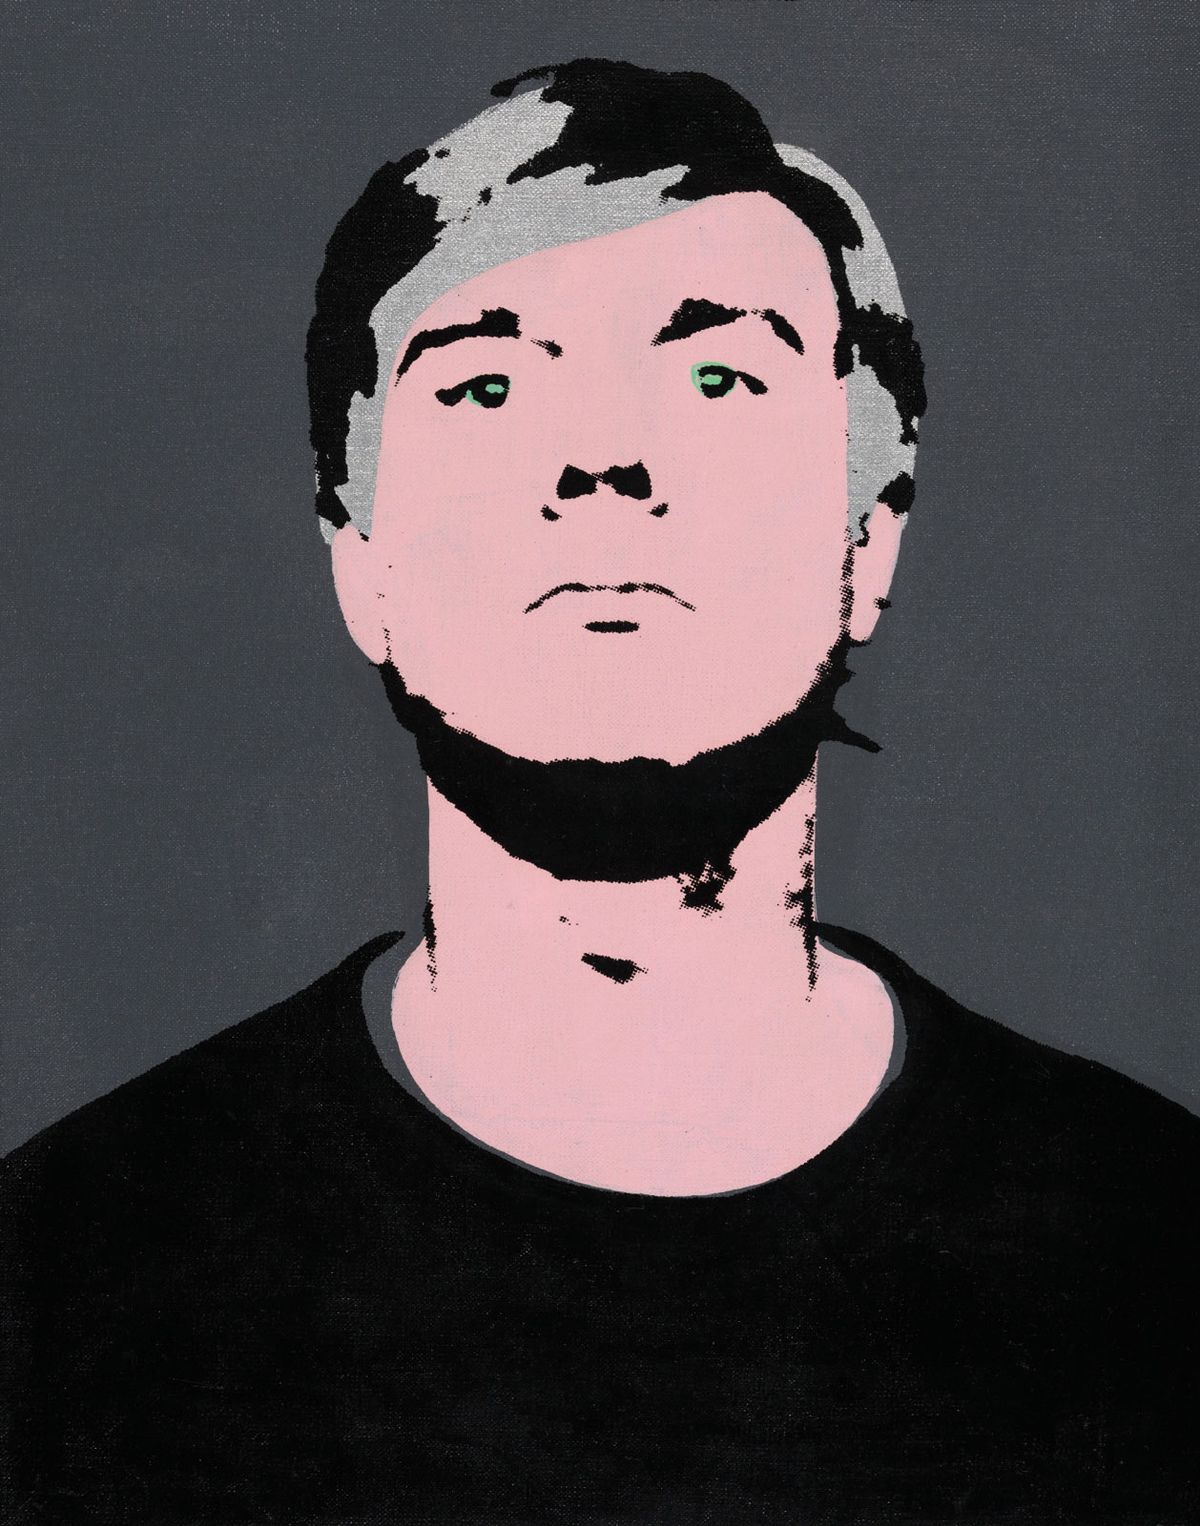 Warhol's acrylic and silkscreen ink Self-Portrait (1964) © The Andy Warhol Foundation for the Visual Arts/Artists Rights Society